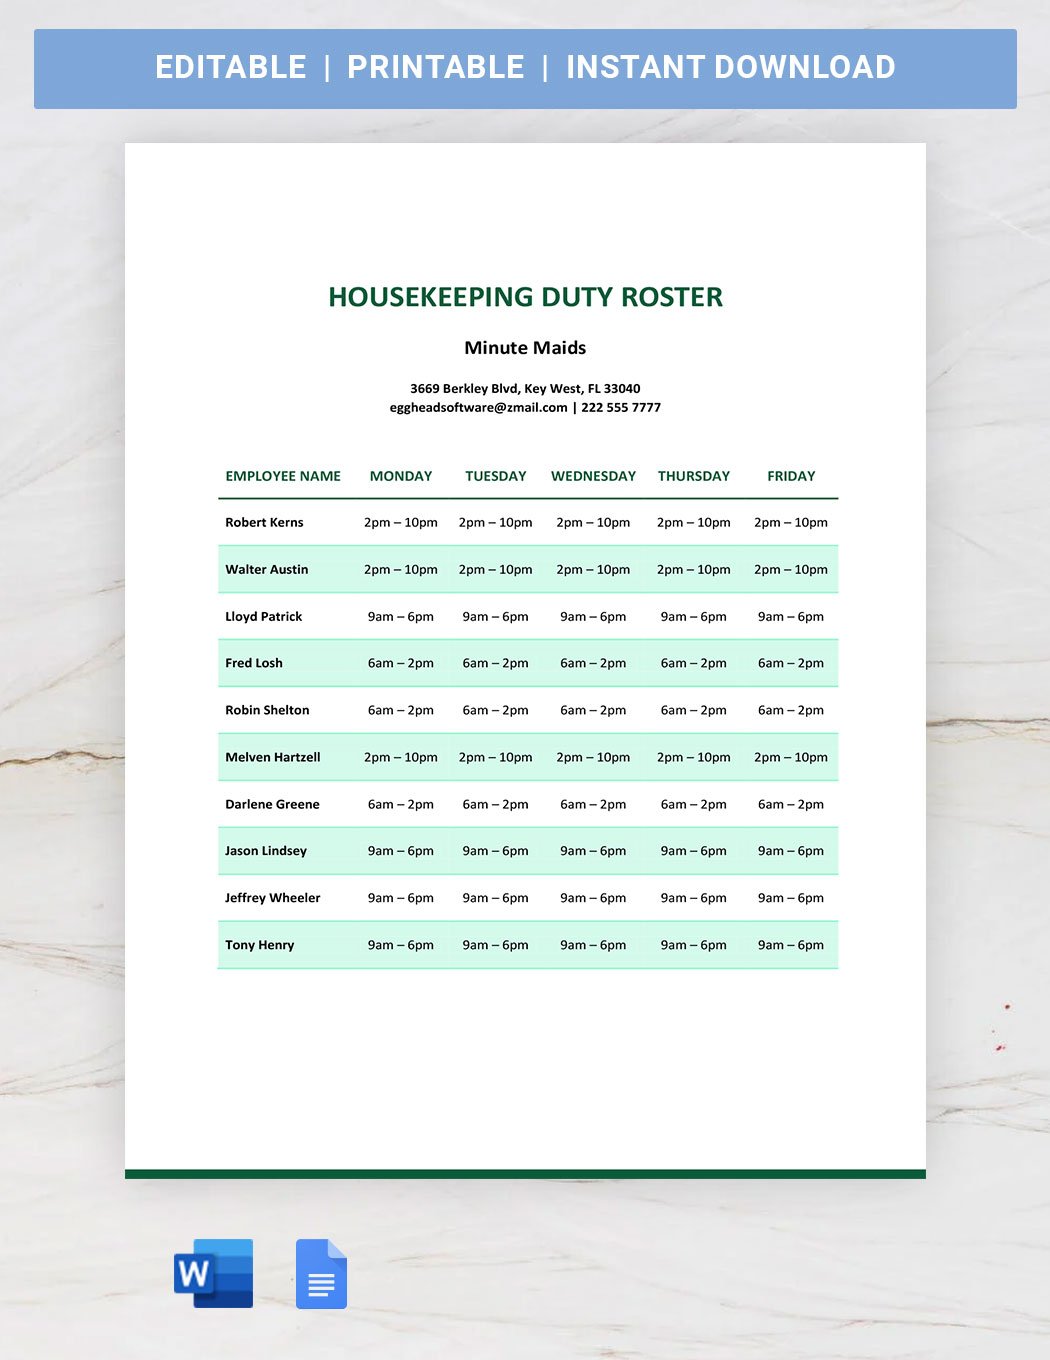 Housekeeping Duty Roster Template